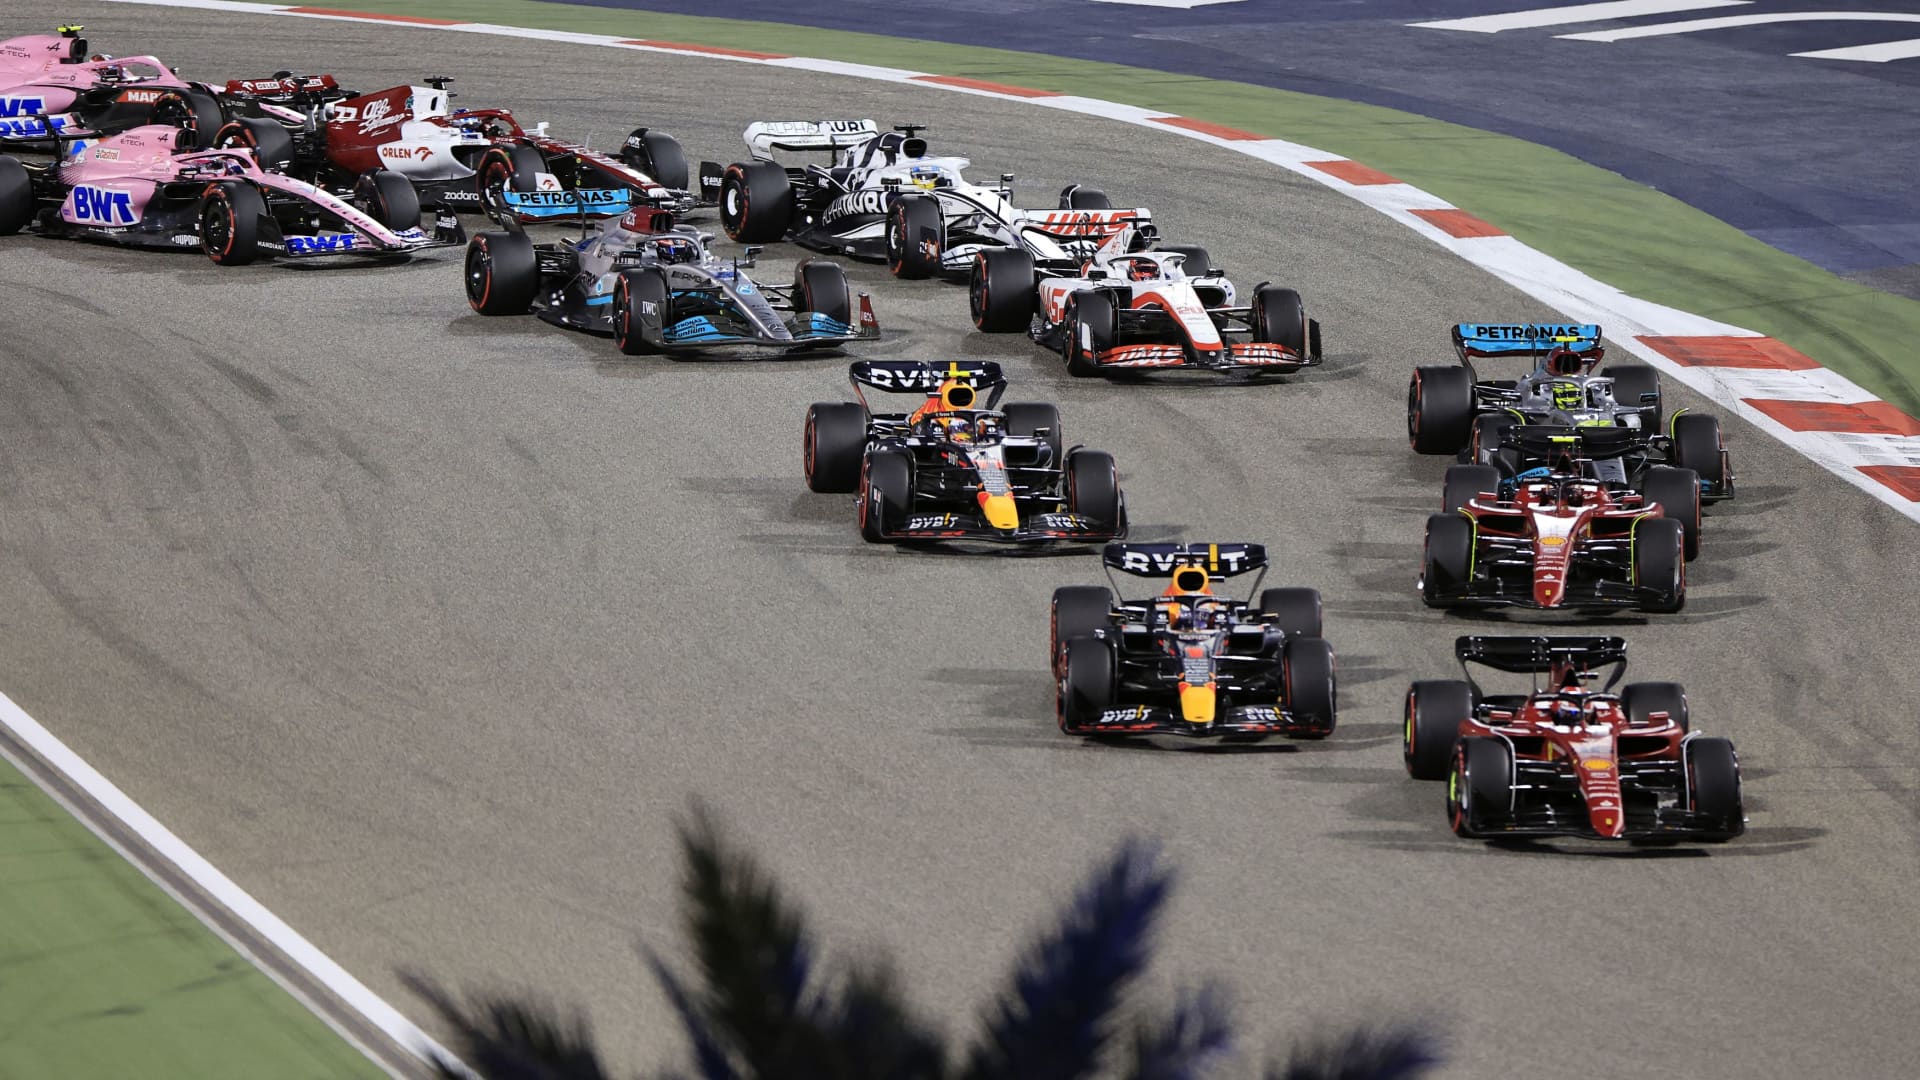 The 2022 Bahrain Grand Prix was ESPN's most-watched since 1995